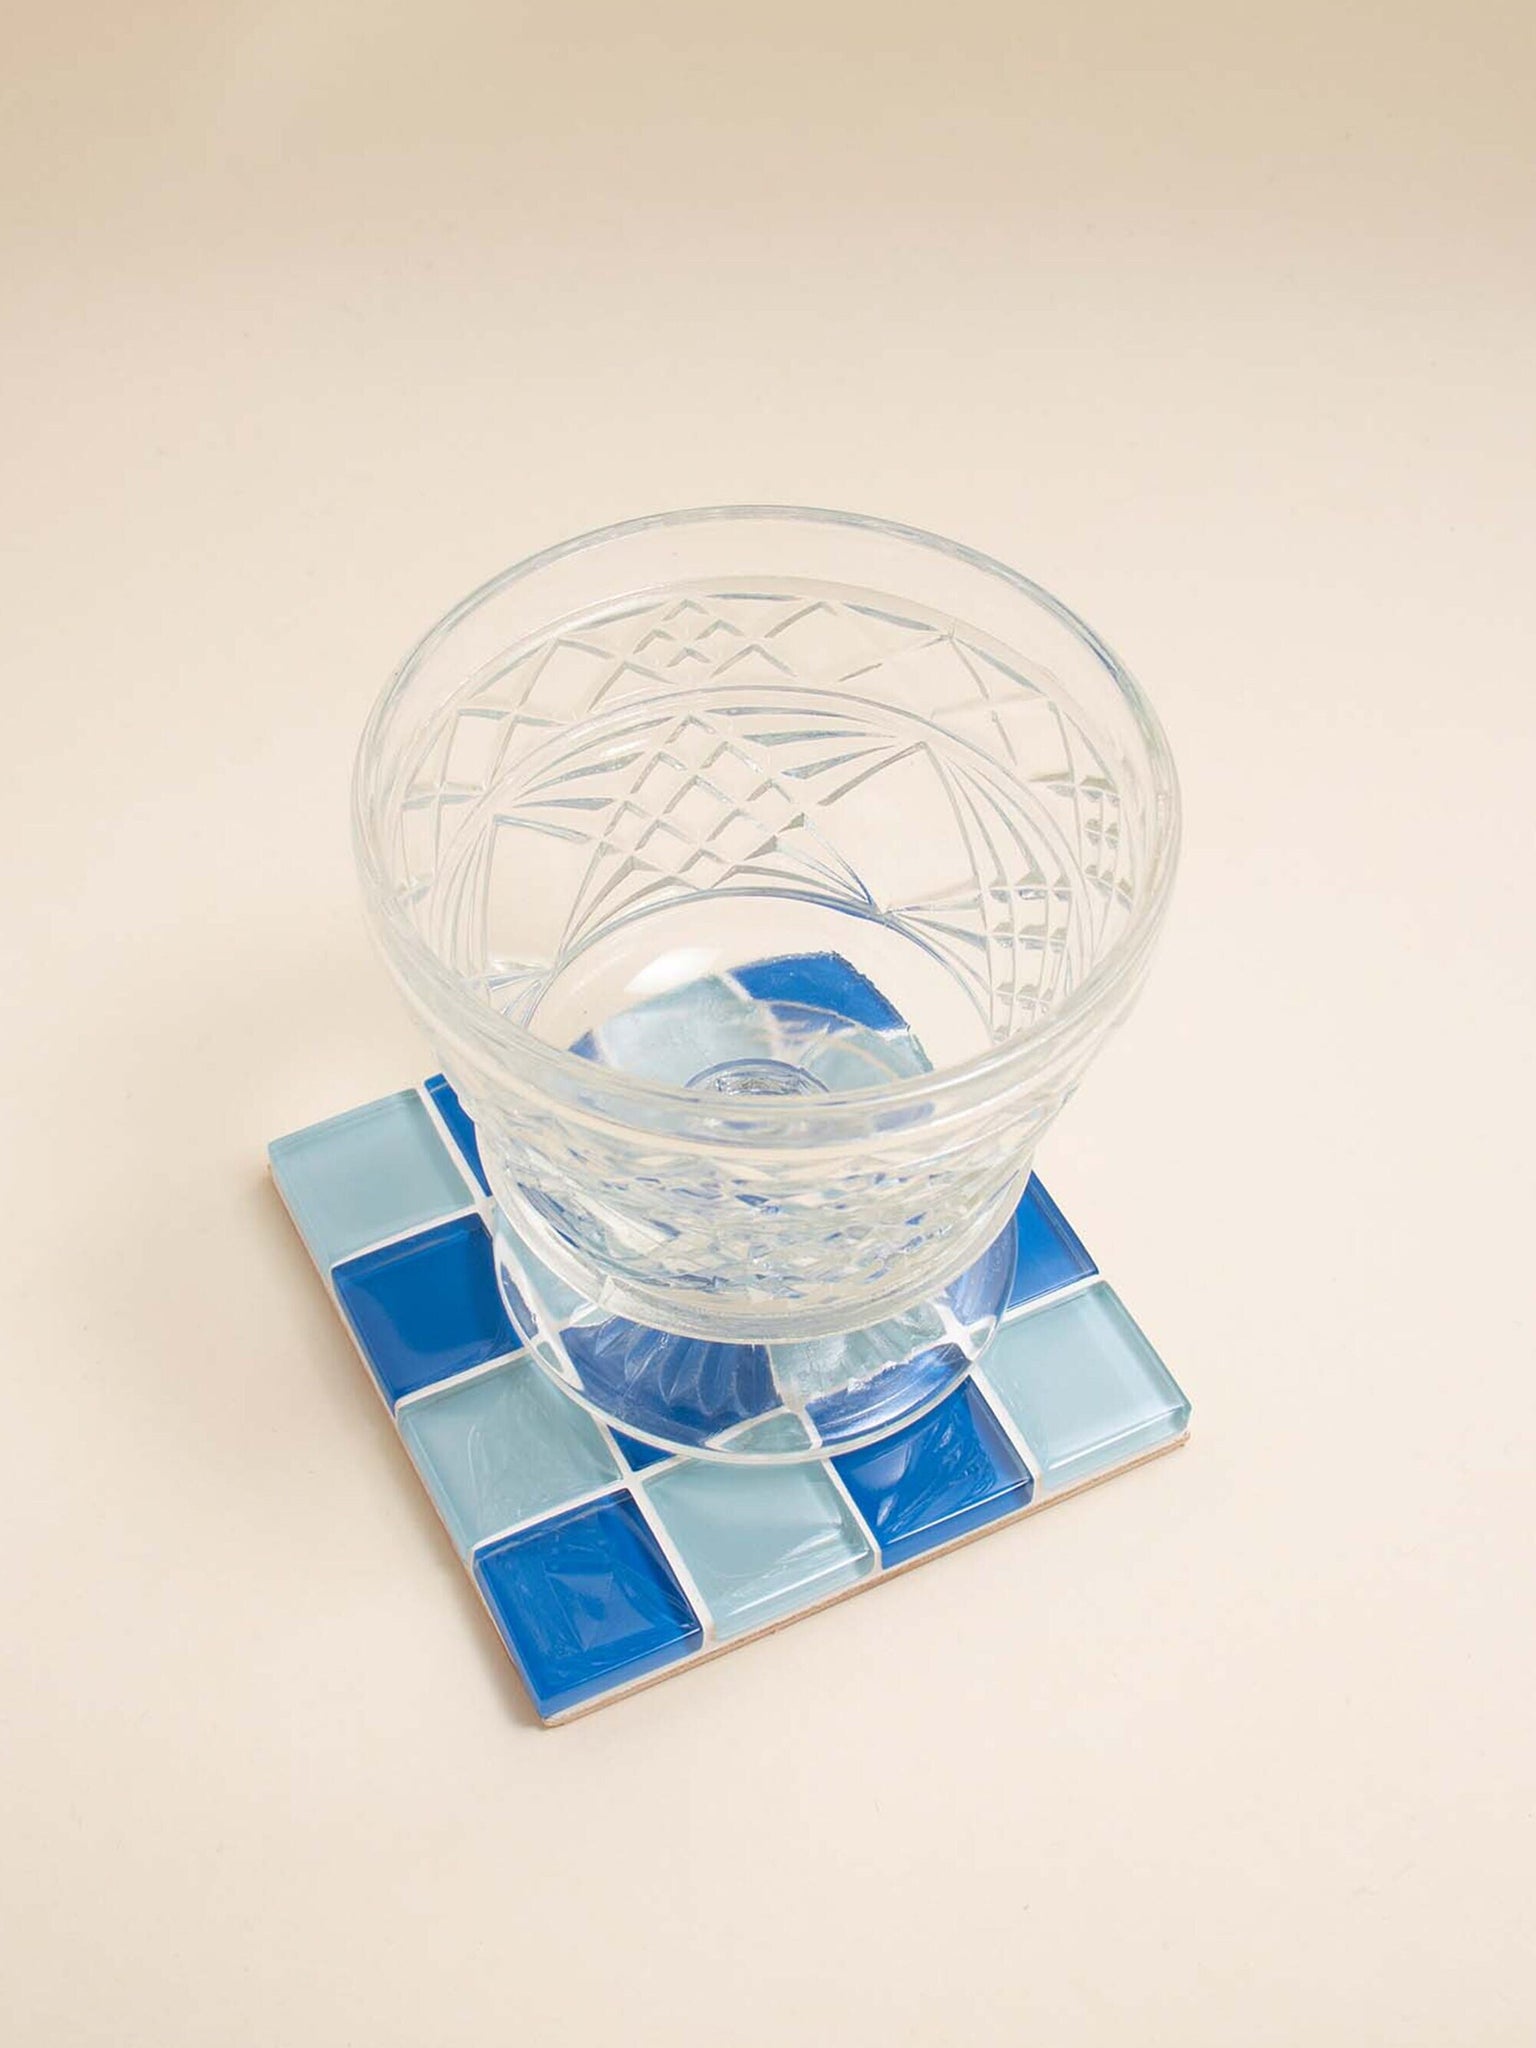 Checkered Glass Tile Coaster | Handmade Drink Coaster | Square Coaster | Housewarming Gift | Gift for Her | Gift for Him | Valentine Gift 3